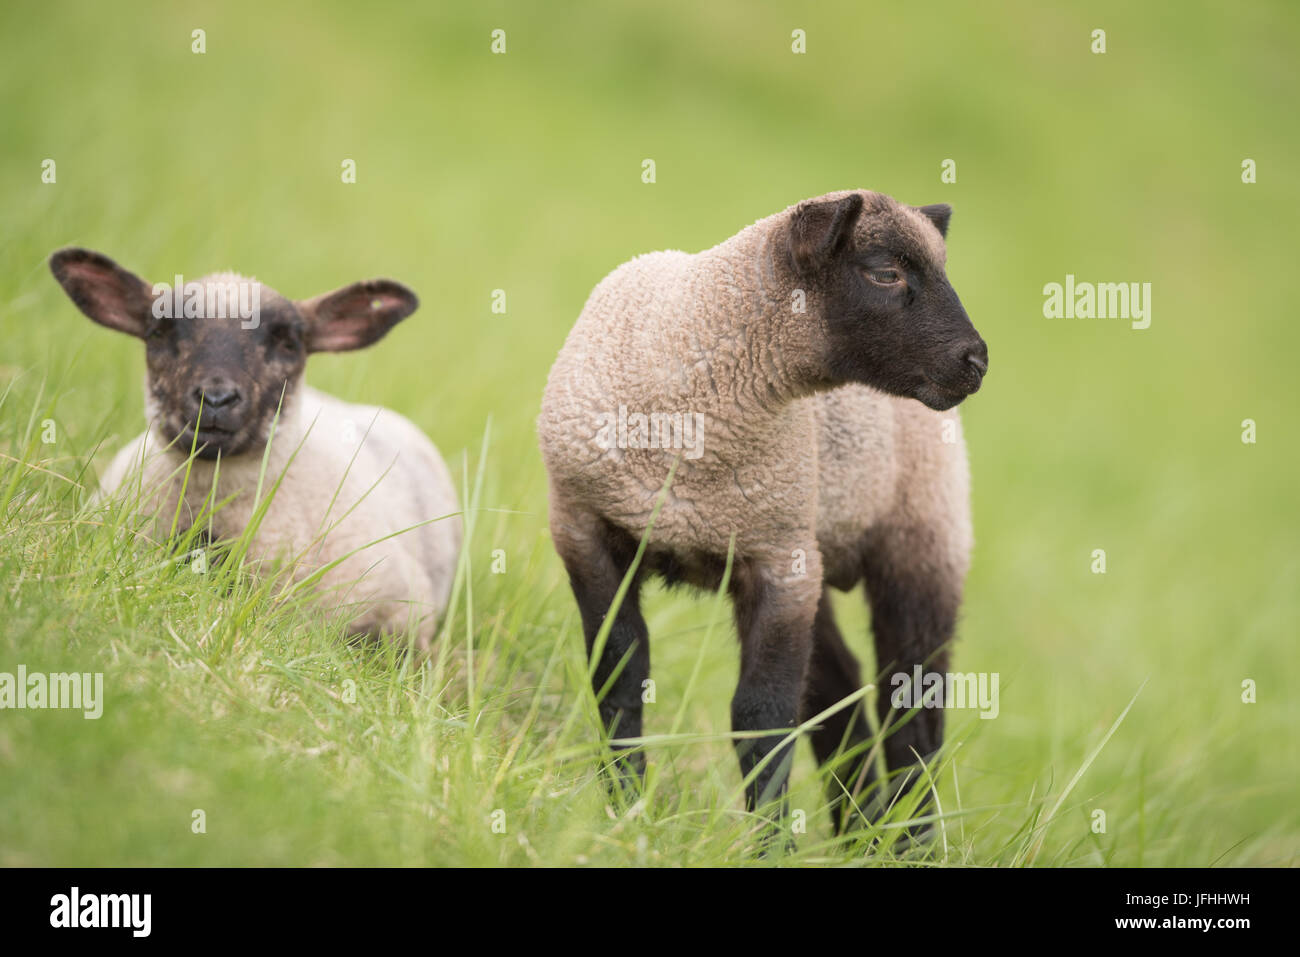 Young sheep with black head. Stock Photo